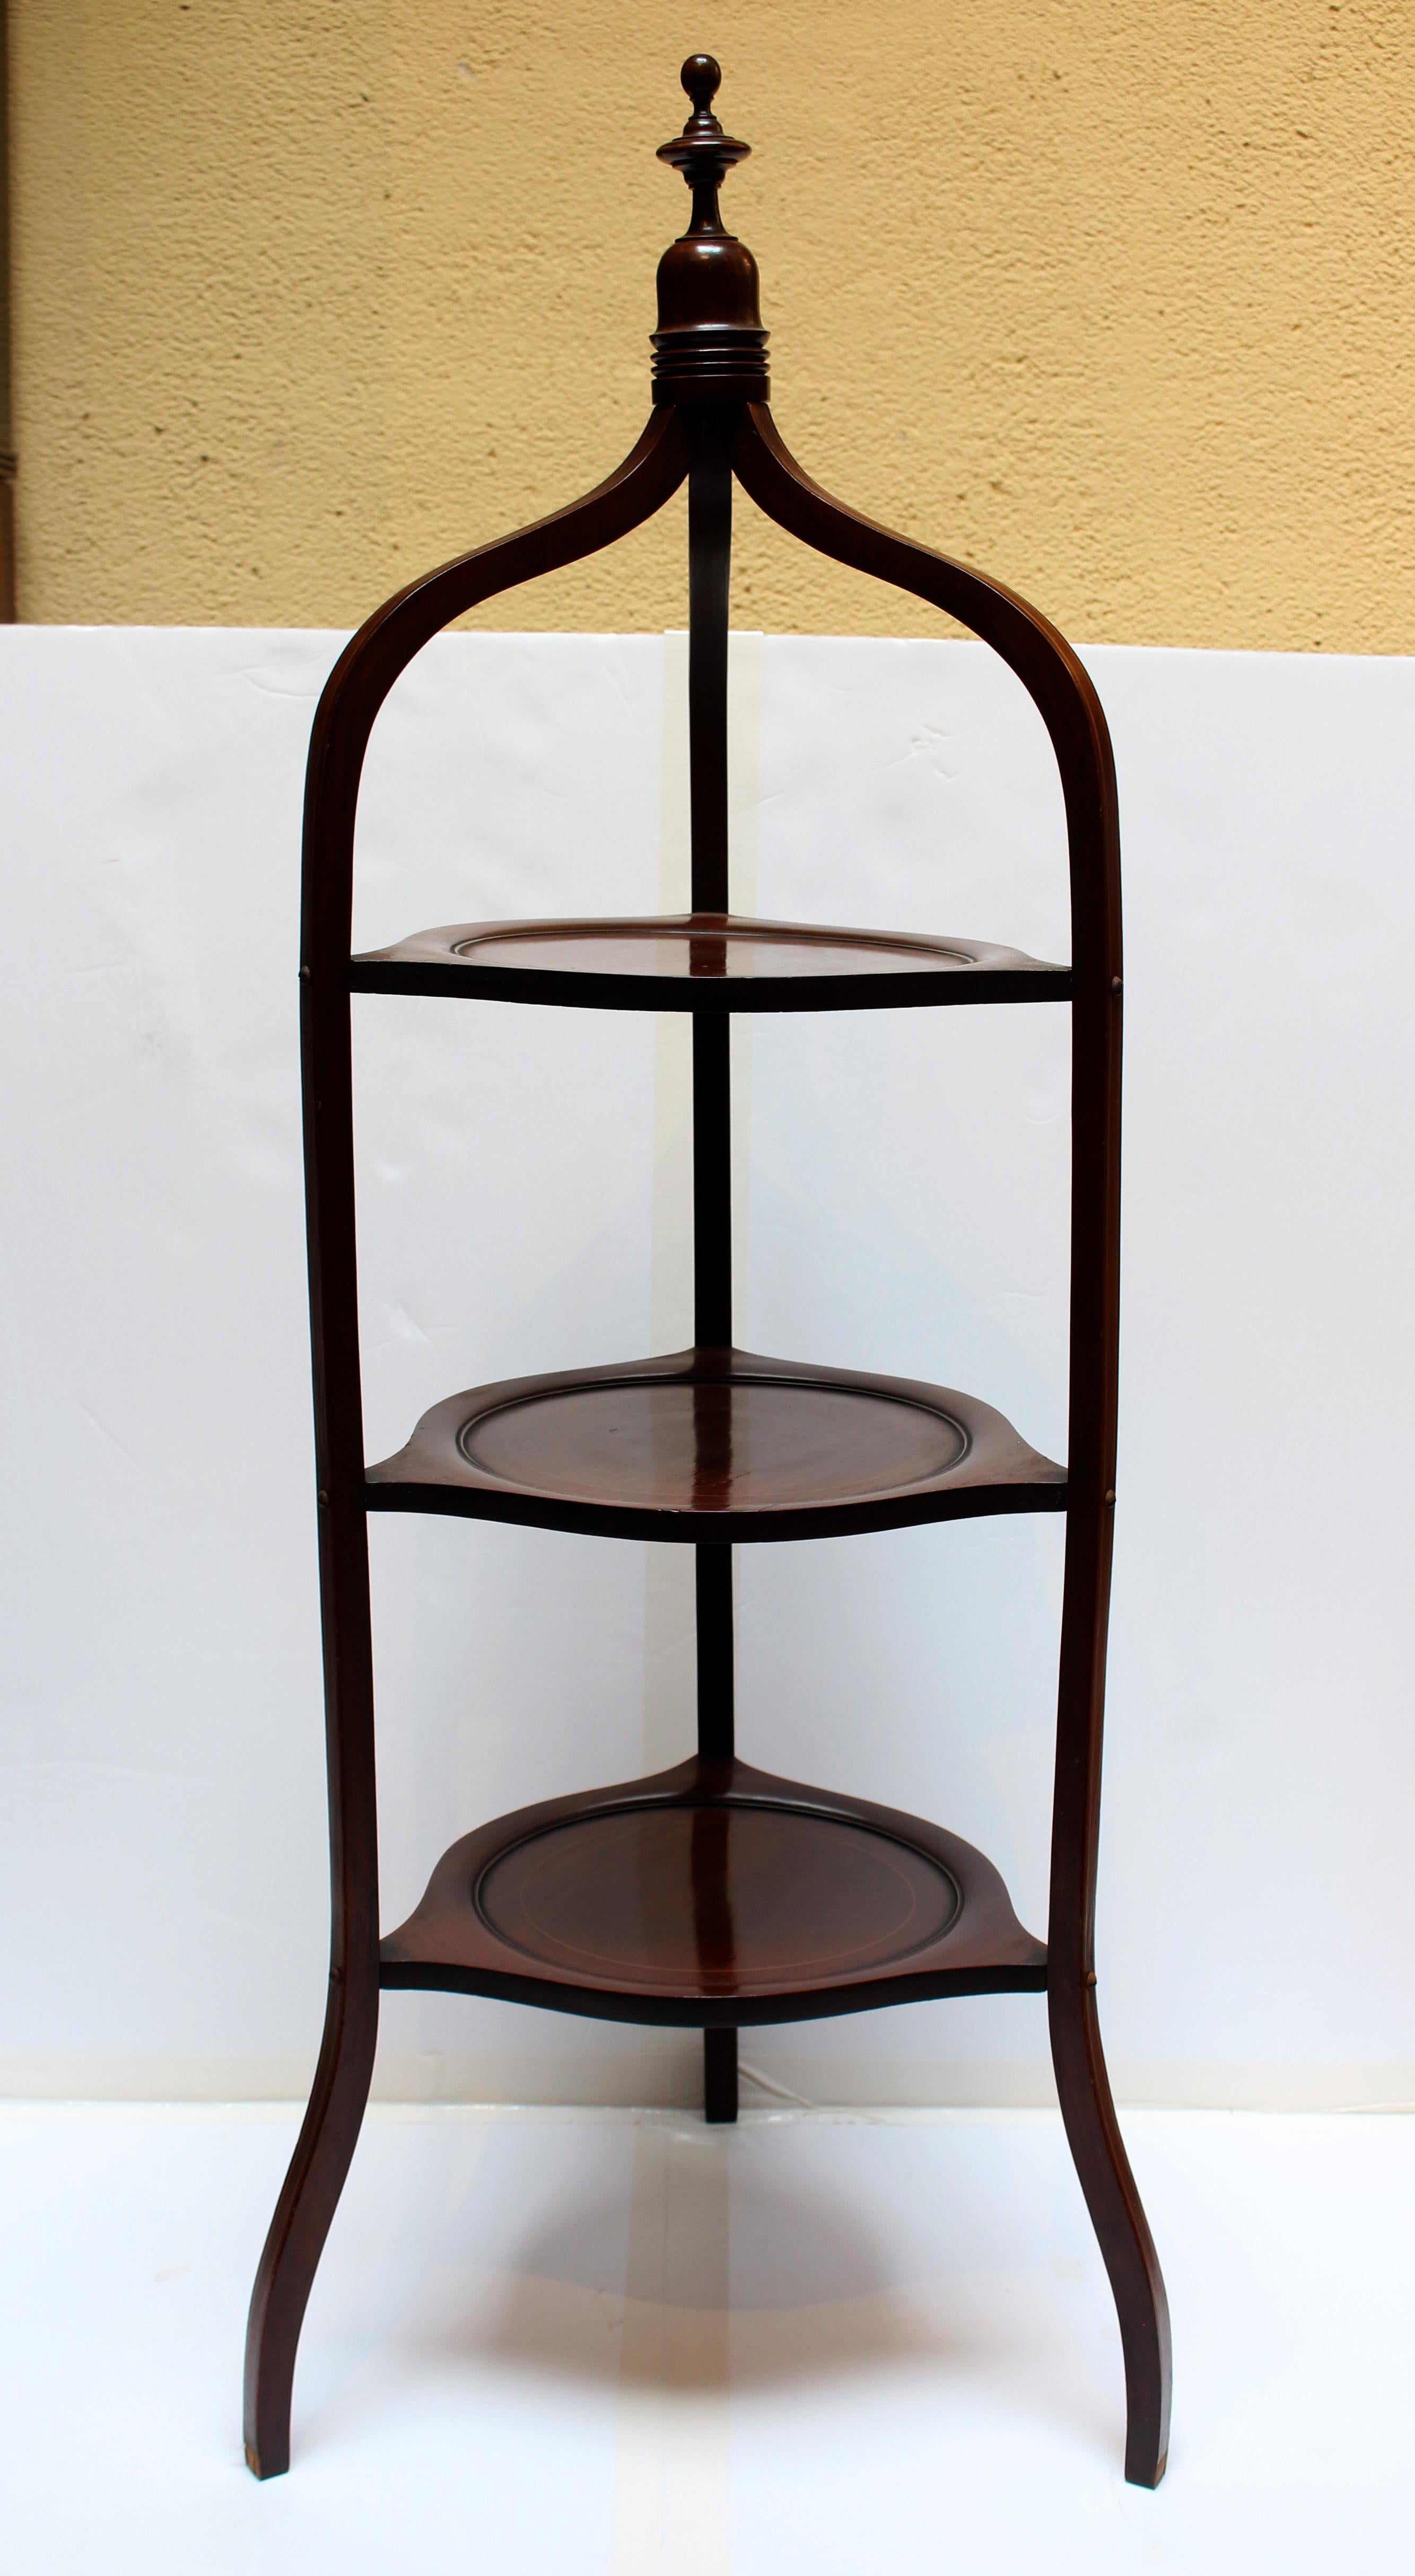 Circa 1890 muffin stand, English, neoclassical style. Mahogany with boxwood circle inlaid molded surfaces & boxwood stringing on uprights. 3-tiers. Finial top. 15.5